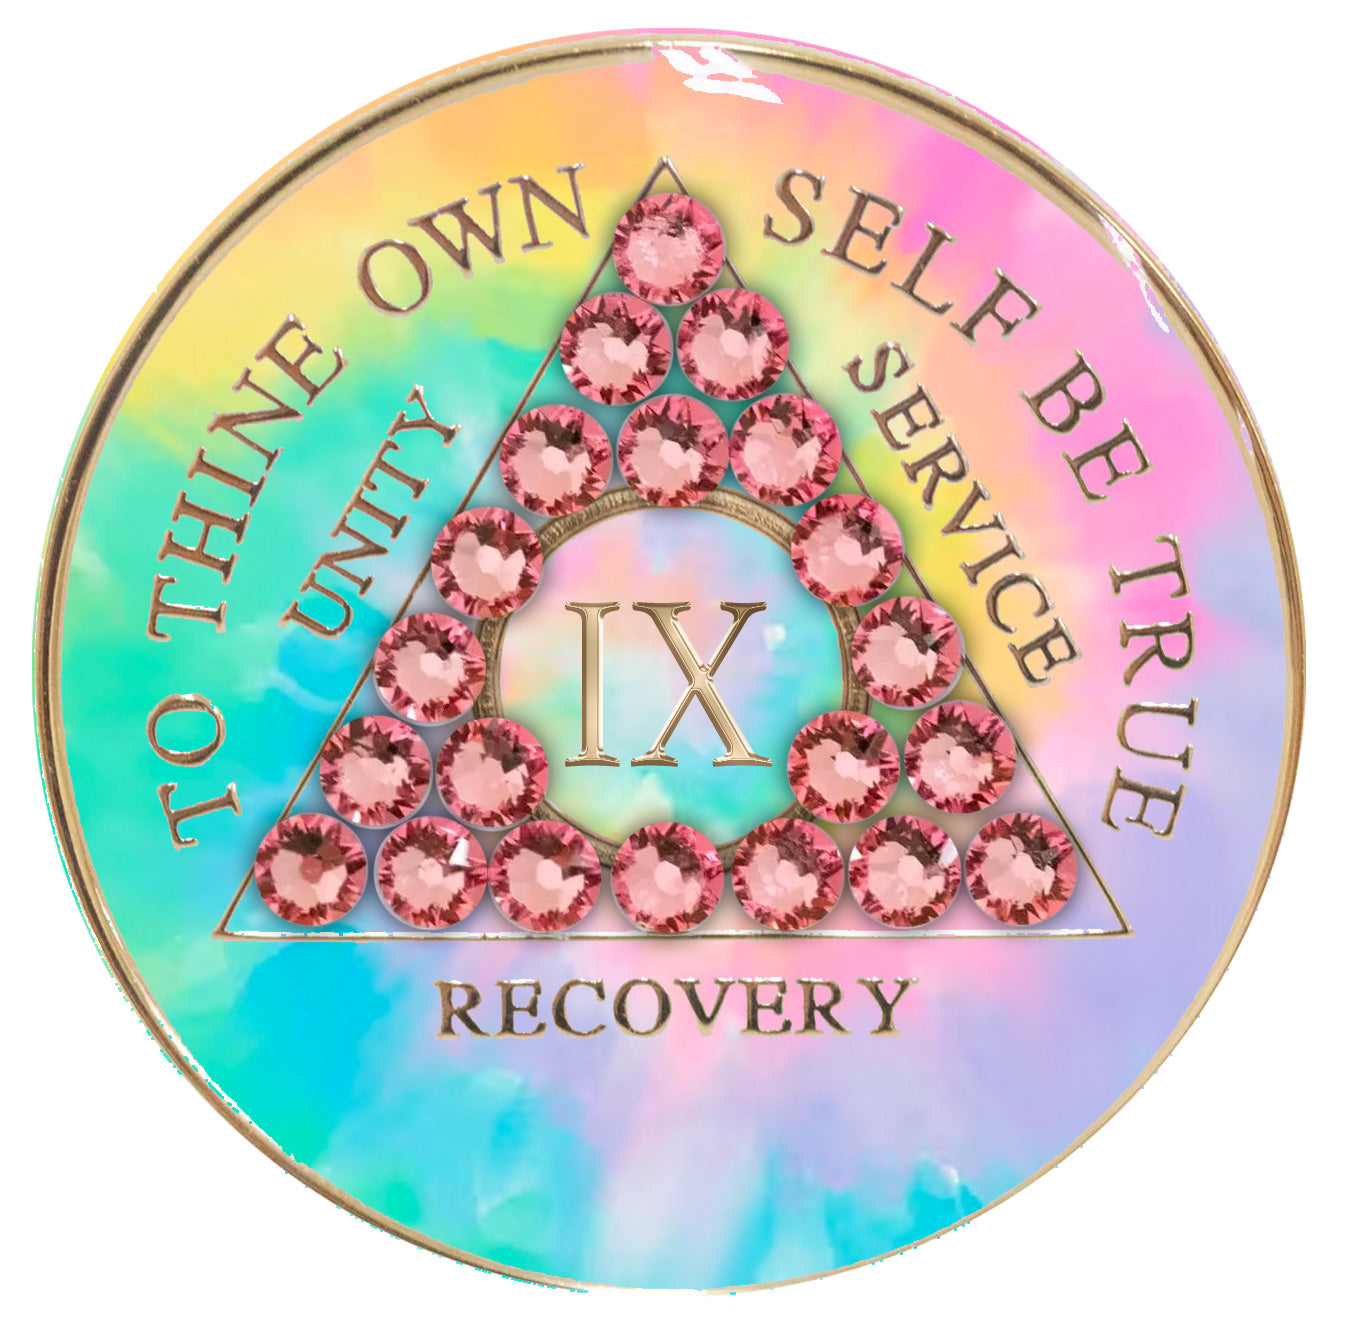 9 year AA medallion pastel tie-dye representing a psychic change that is needed in the recovery journey, with twenty-one light rose genuine crystals, pink, blue, yellow, and green, in the shape of the triangle, with the AA moto and roman numeral embossed in 14k gold-plated brass, the medallion is sealed with resin for a glossy, scratch free finish.